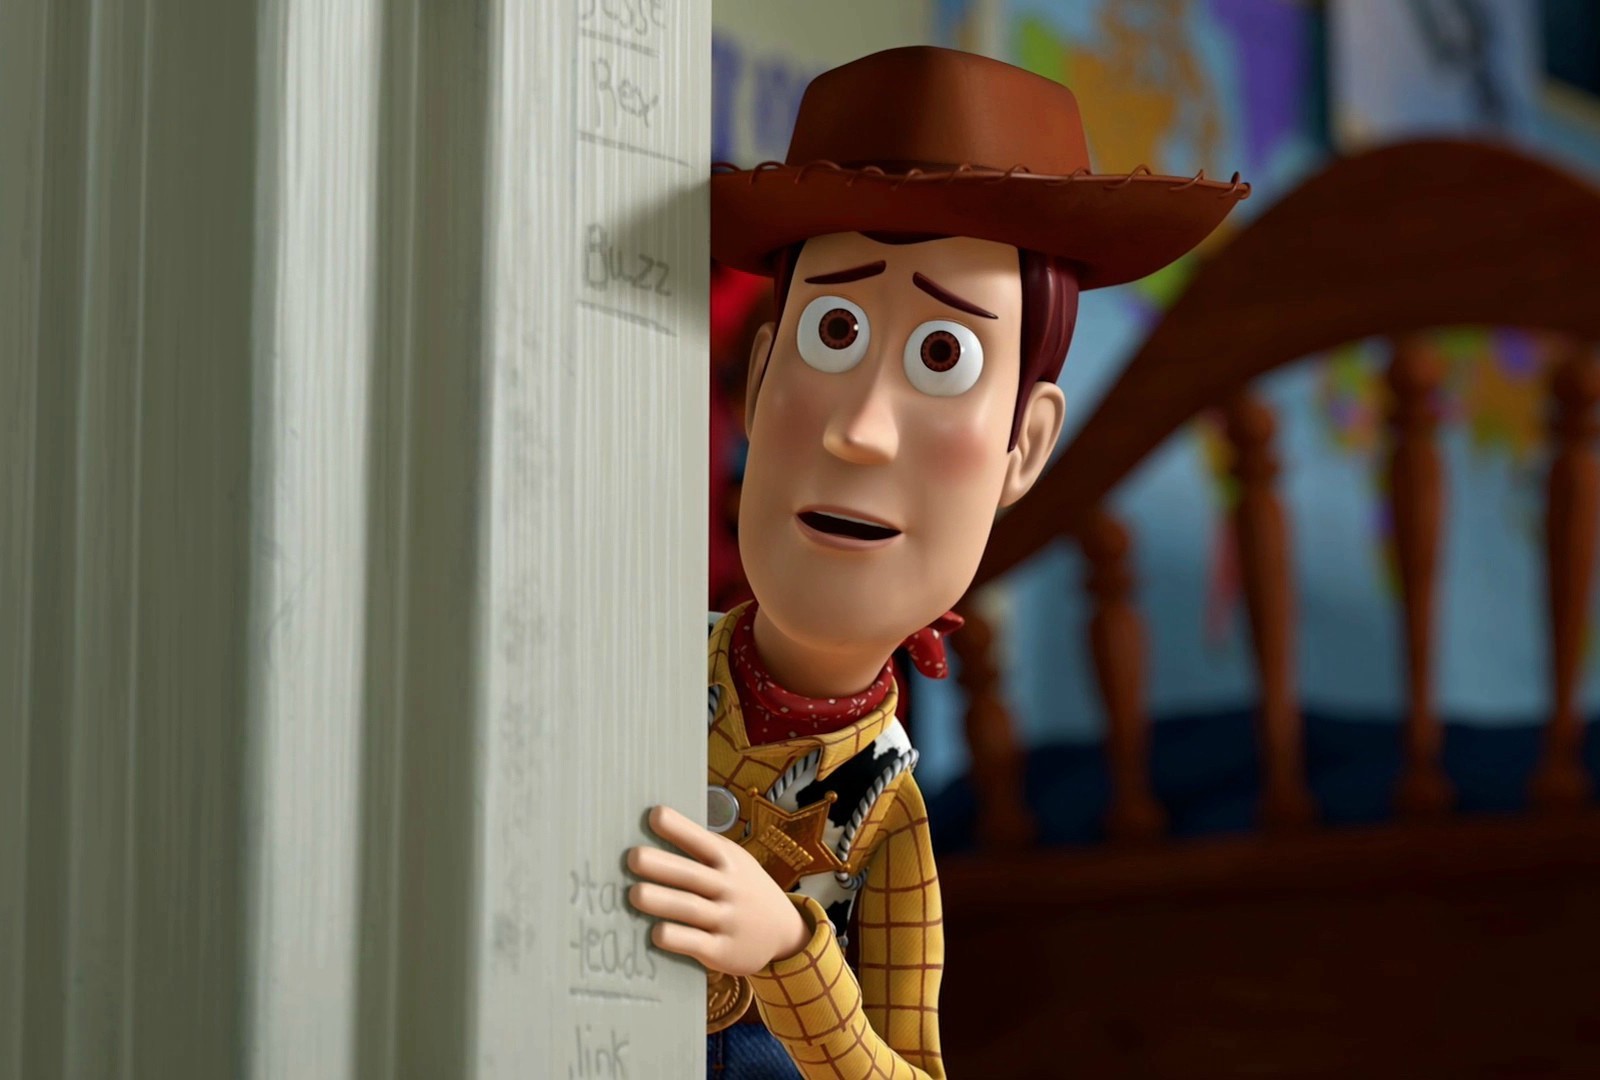 Which Three Pixar Characters Are You A Combo Of? 1521